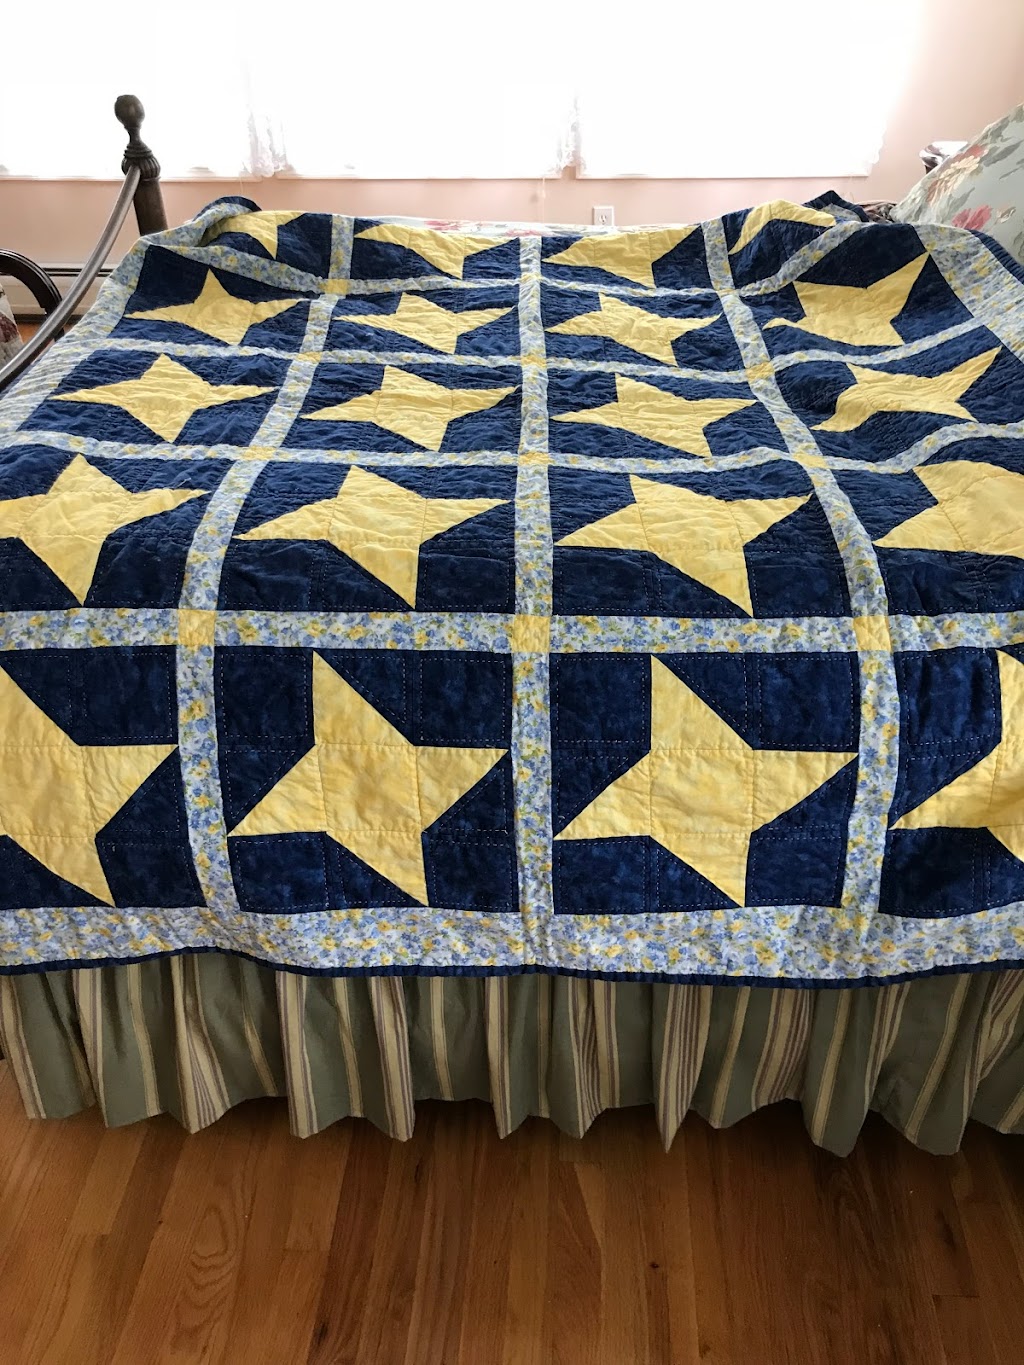 memory pillows and quilts | 4 Valley View Rd, Long Valley, NJ 07853 | Phone: (973) 722-2430